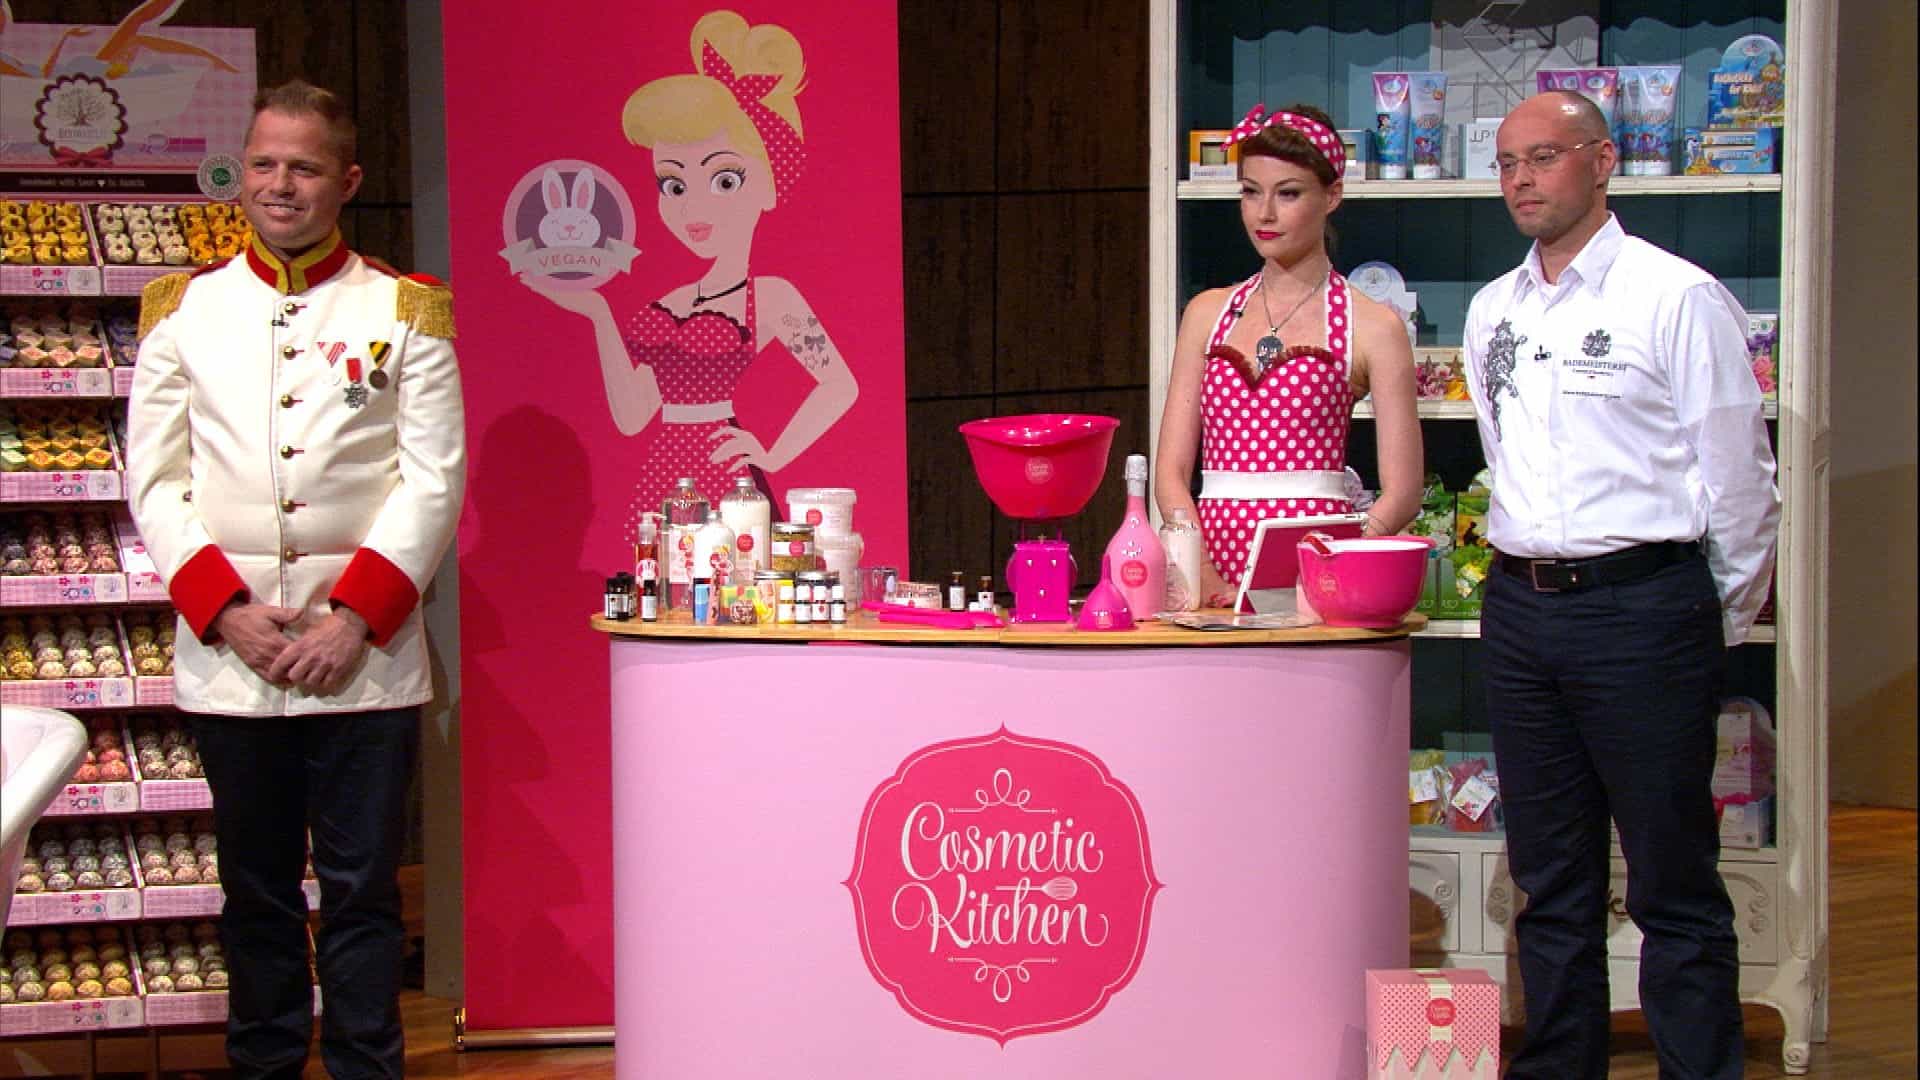 Cosmetic Kitchen